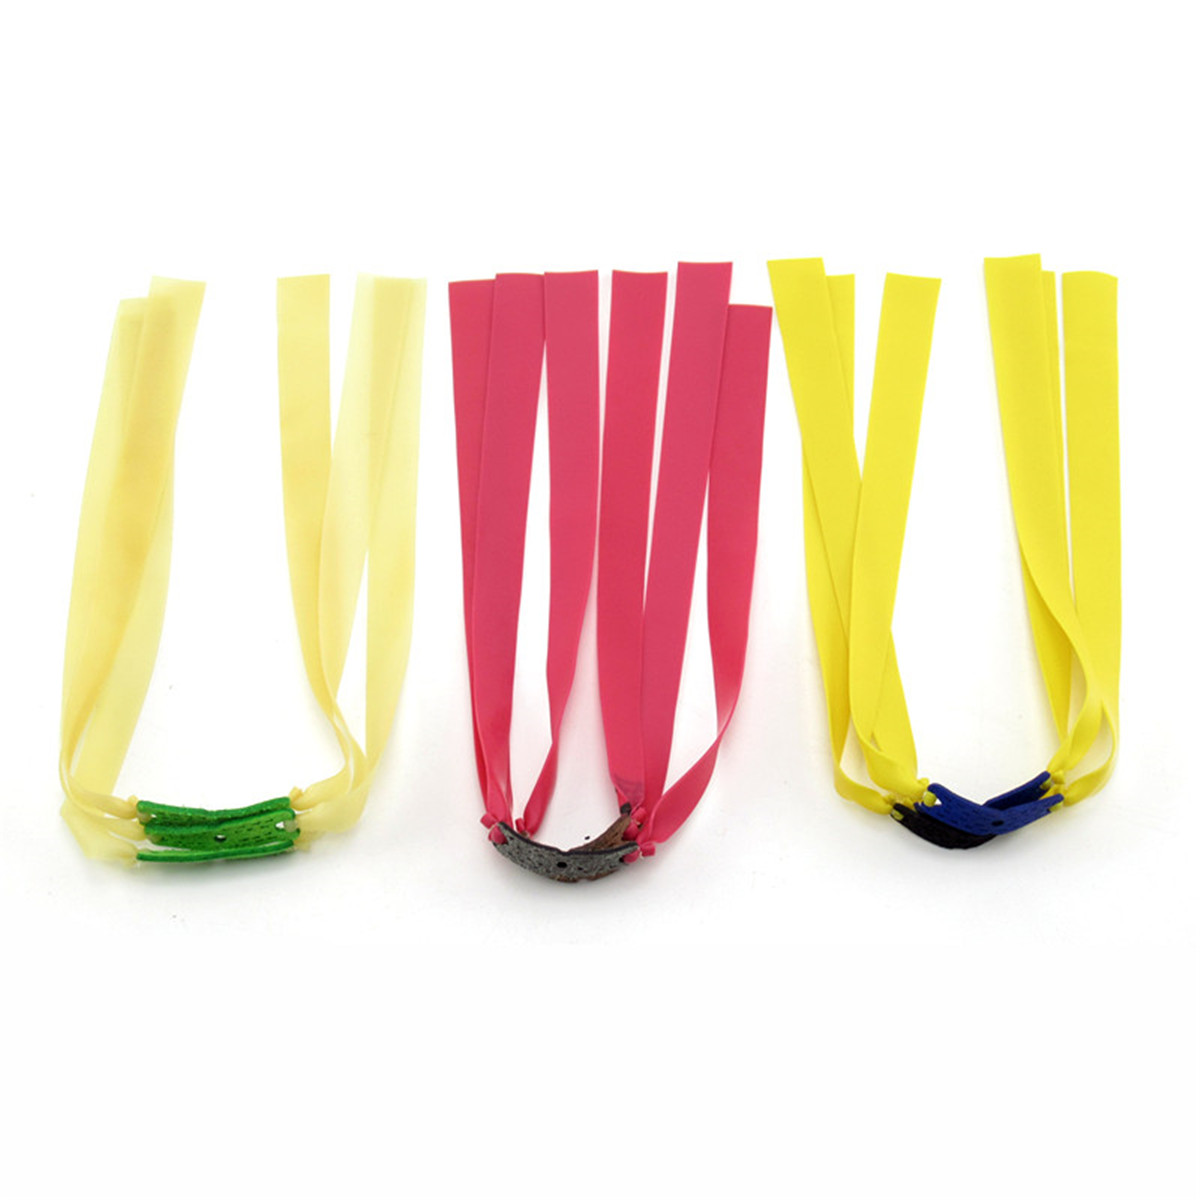 Resilient Elastic Band Natural Rubber Catapult Latex Tape Slingshot Accessory